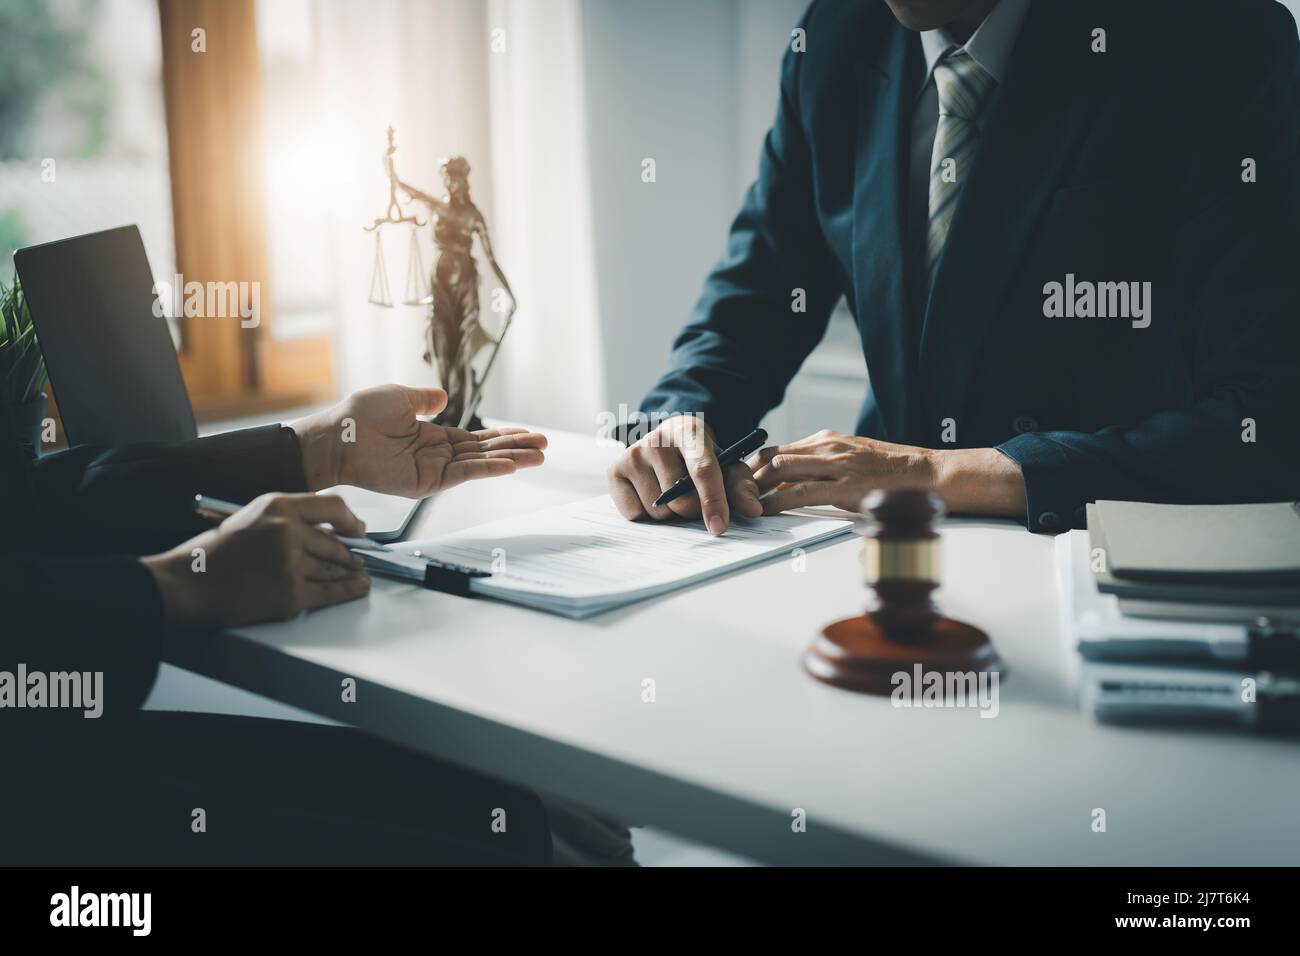 Law, Consultation, Agreement, Contract, Attorney or Lawyer holding a pen is consulting with a client to explain the pattern of answering questions Stock Photo